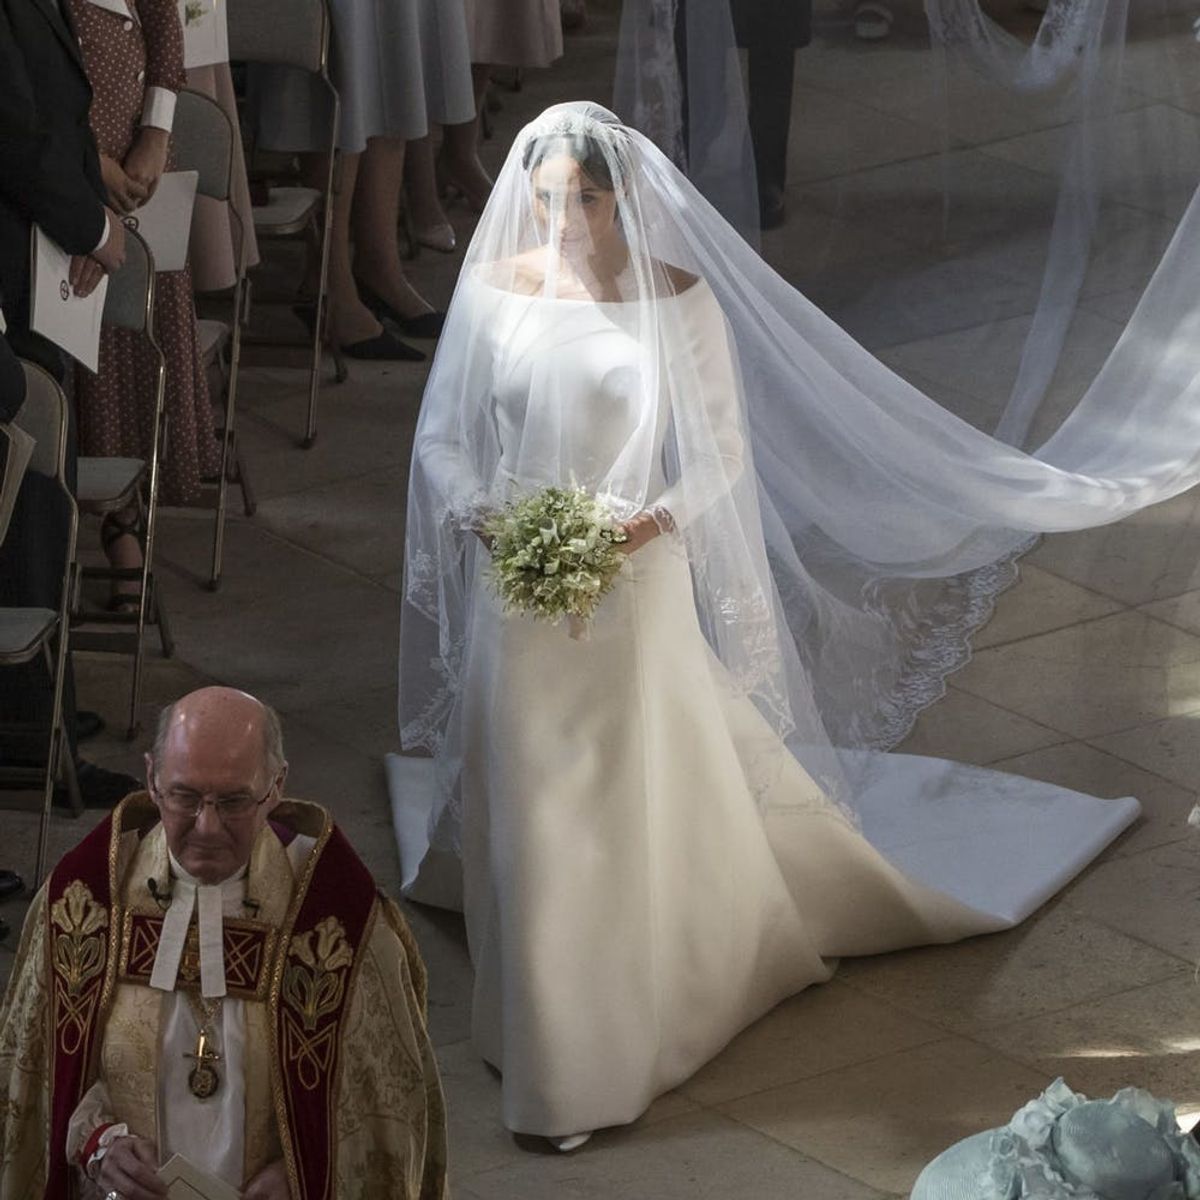 Why It Matters That Meghan Markle Walked Herself Halfway Down the Aisle